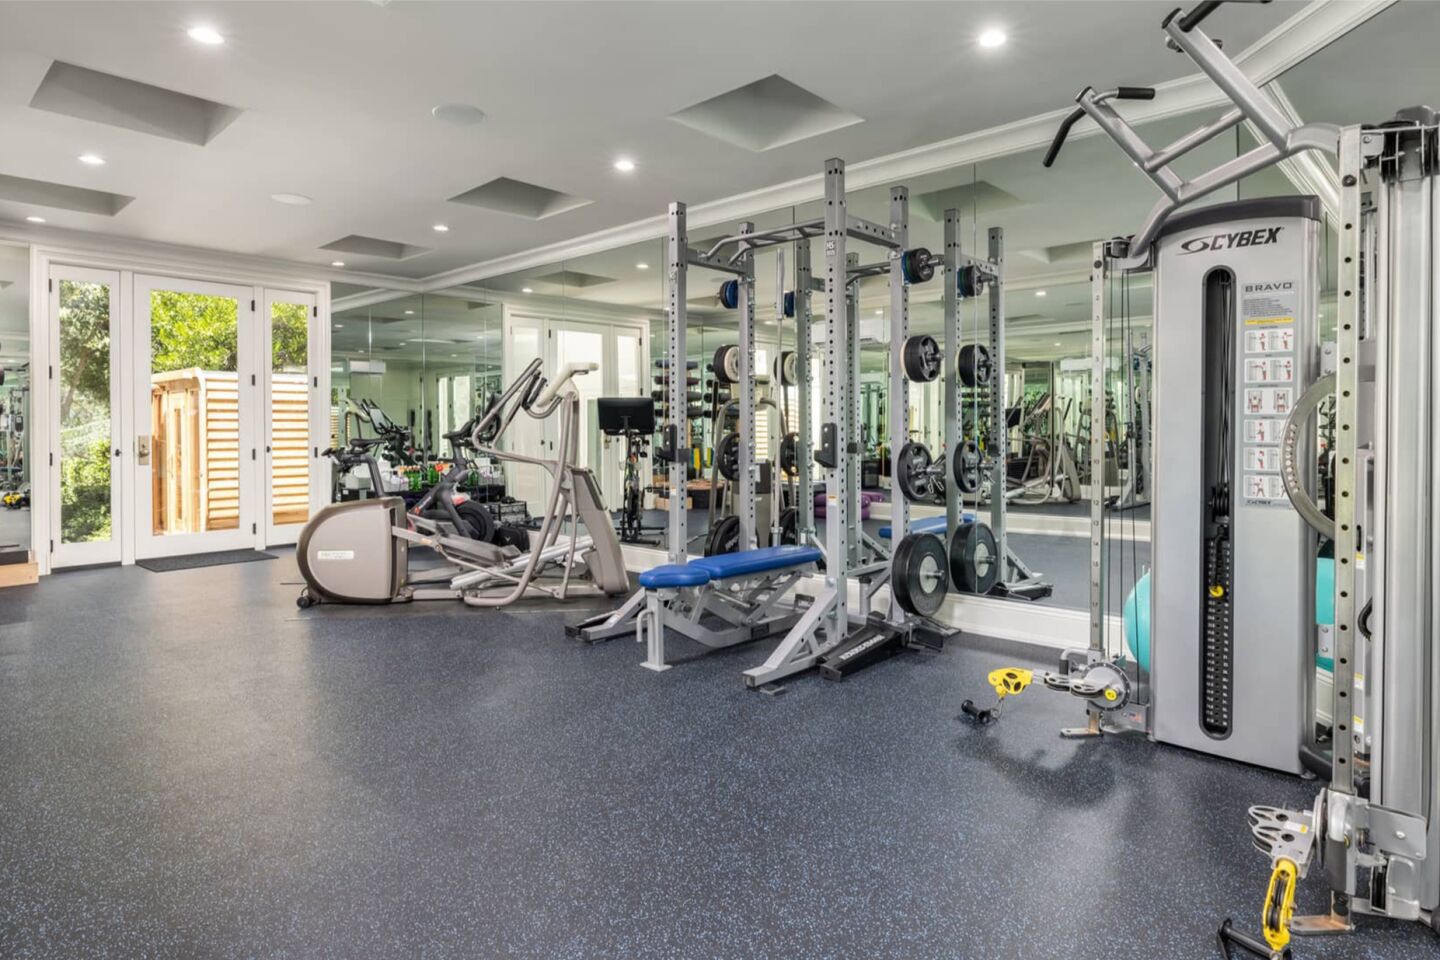 The gym has equipment and windows overlooking greenery.